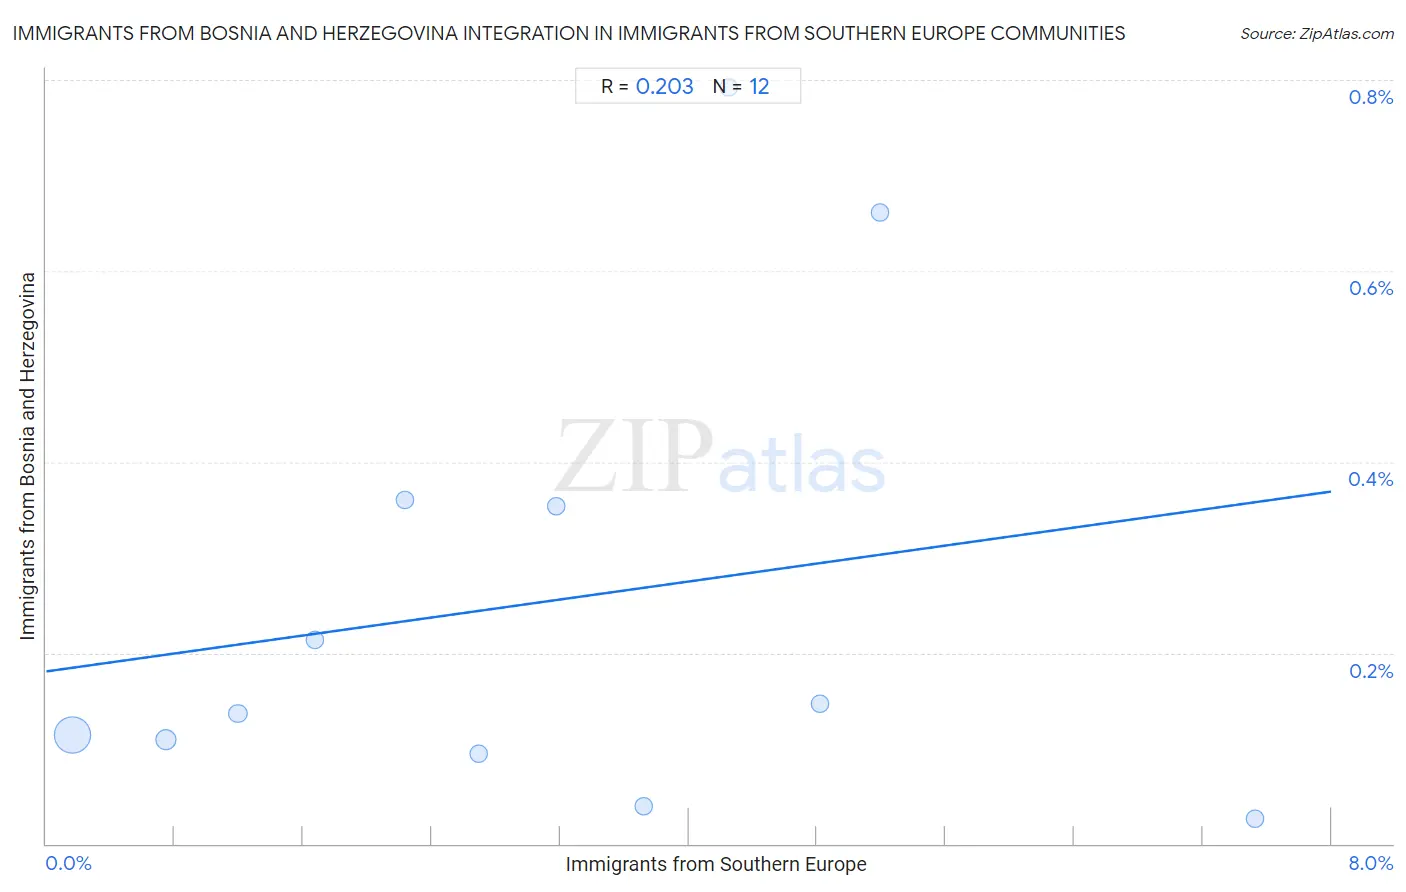 Immigrants from Southern Europe Integration in Immigrants from Bosnia and Herzegovina Communities